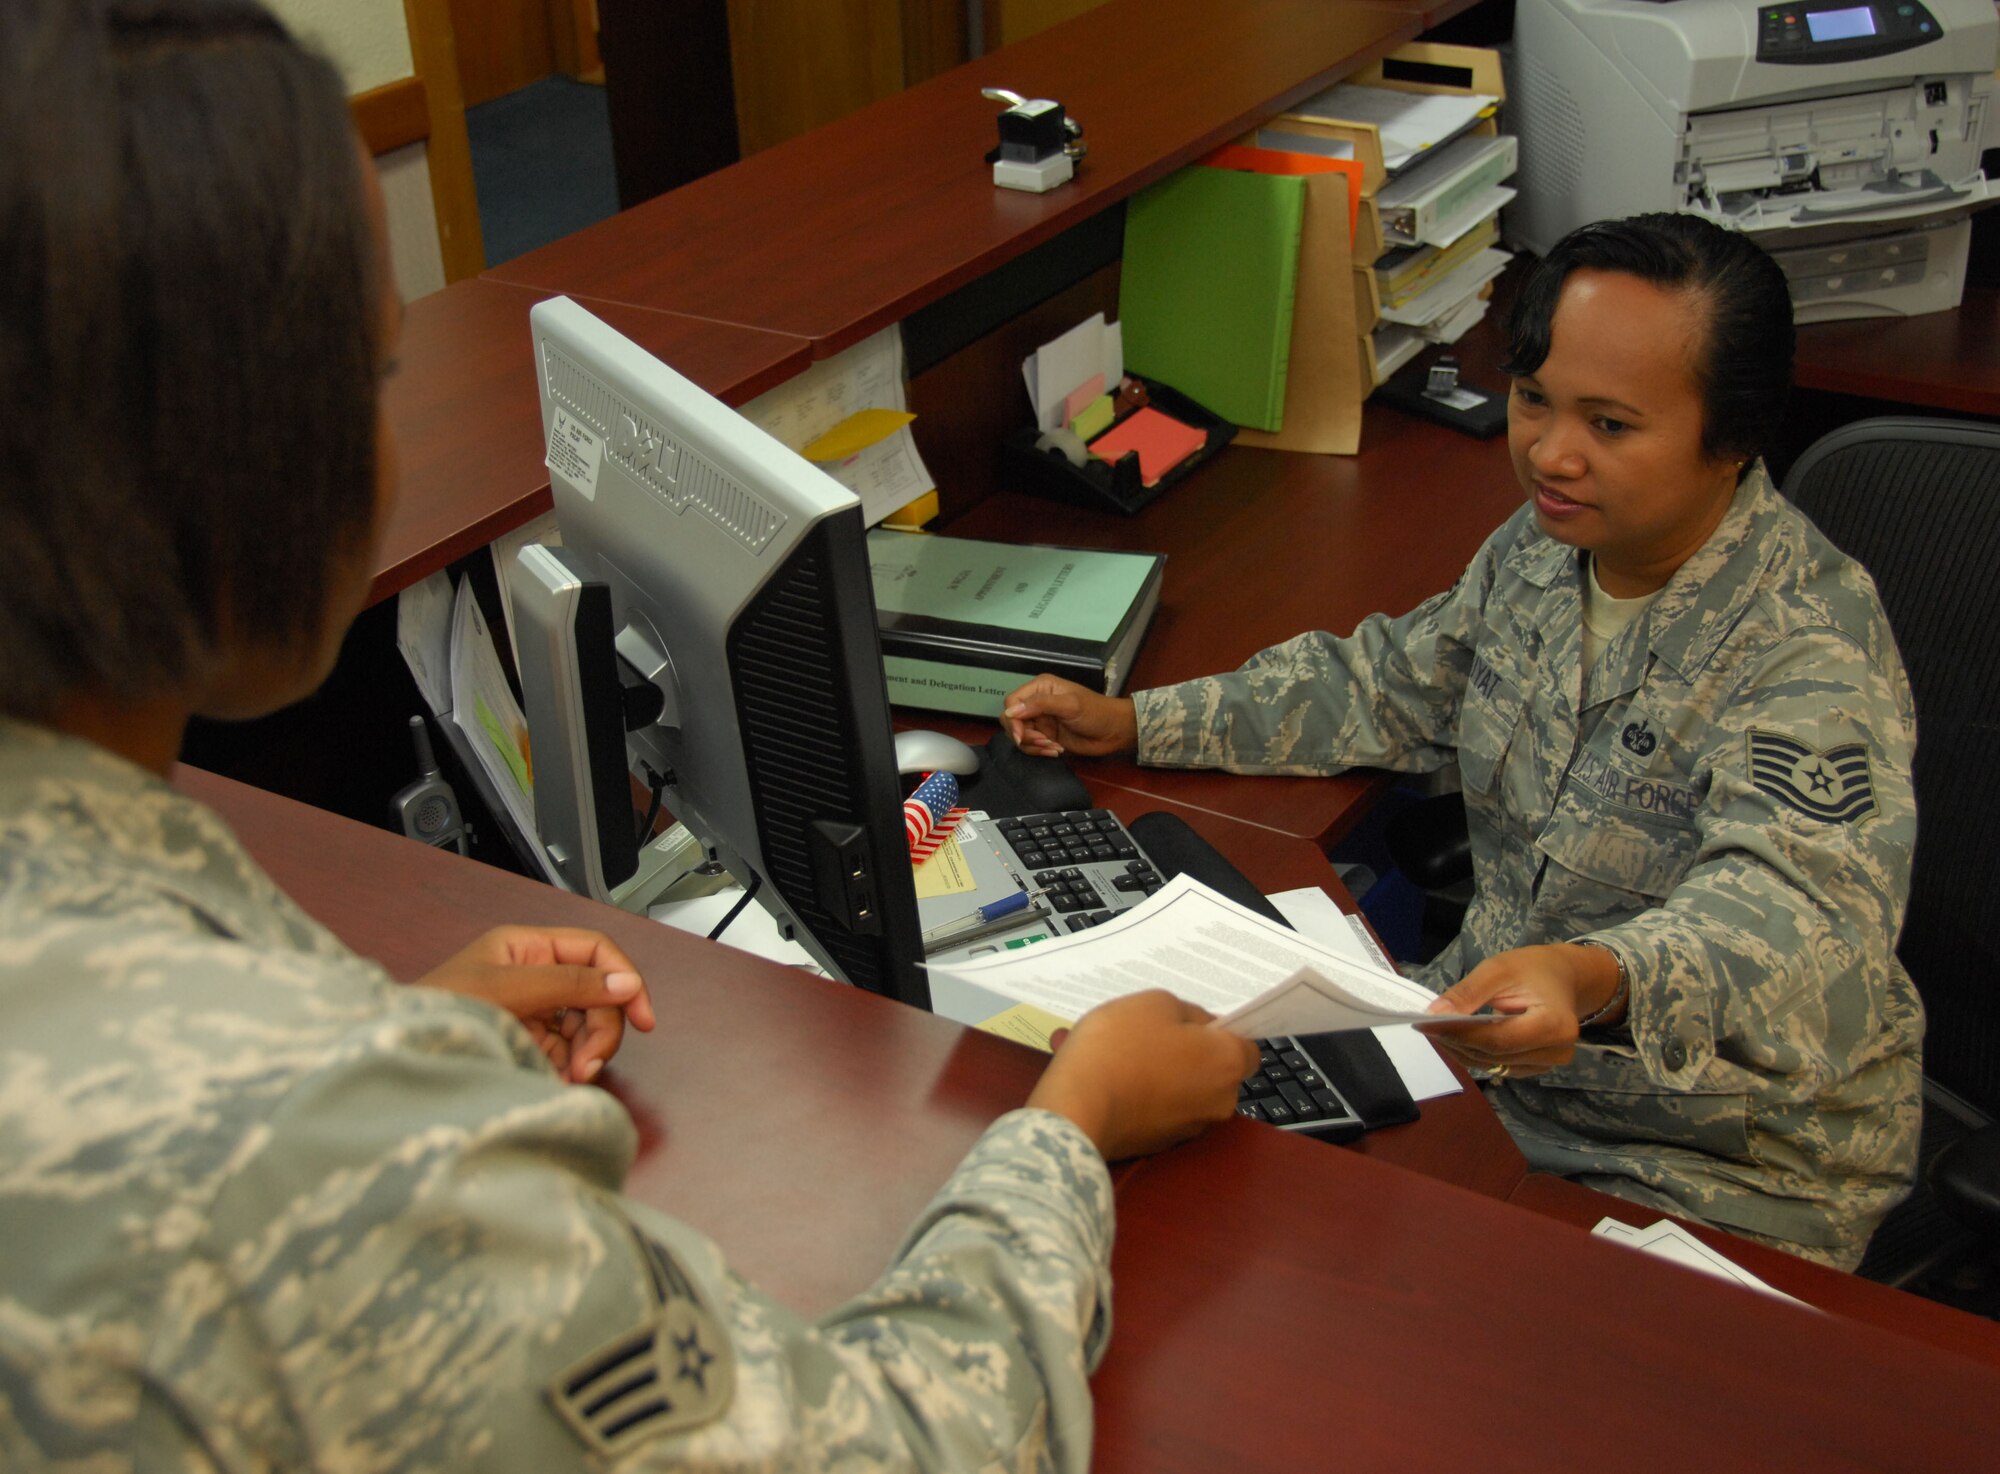 ANDERSEN AIR FORCE BASE, Guam - Tech. Sgt. Elaine Suyat (right), noncommissioned officer in charge of claims for the 36th Wing legal officers, assists an Airman with a general power of attorney here Aug. 28. The legal office provides a variety of services in order to meet the legal needs of all active duty and reserve military members, civilians, dependents and retirees in the Andersen community. (U.S. Air Force photo by Senior Airman Shane Dunaway)